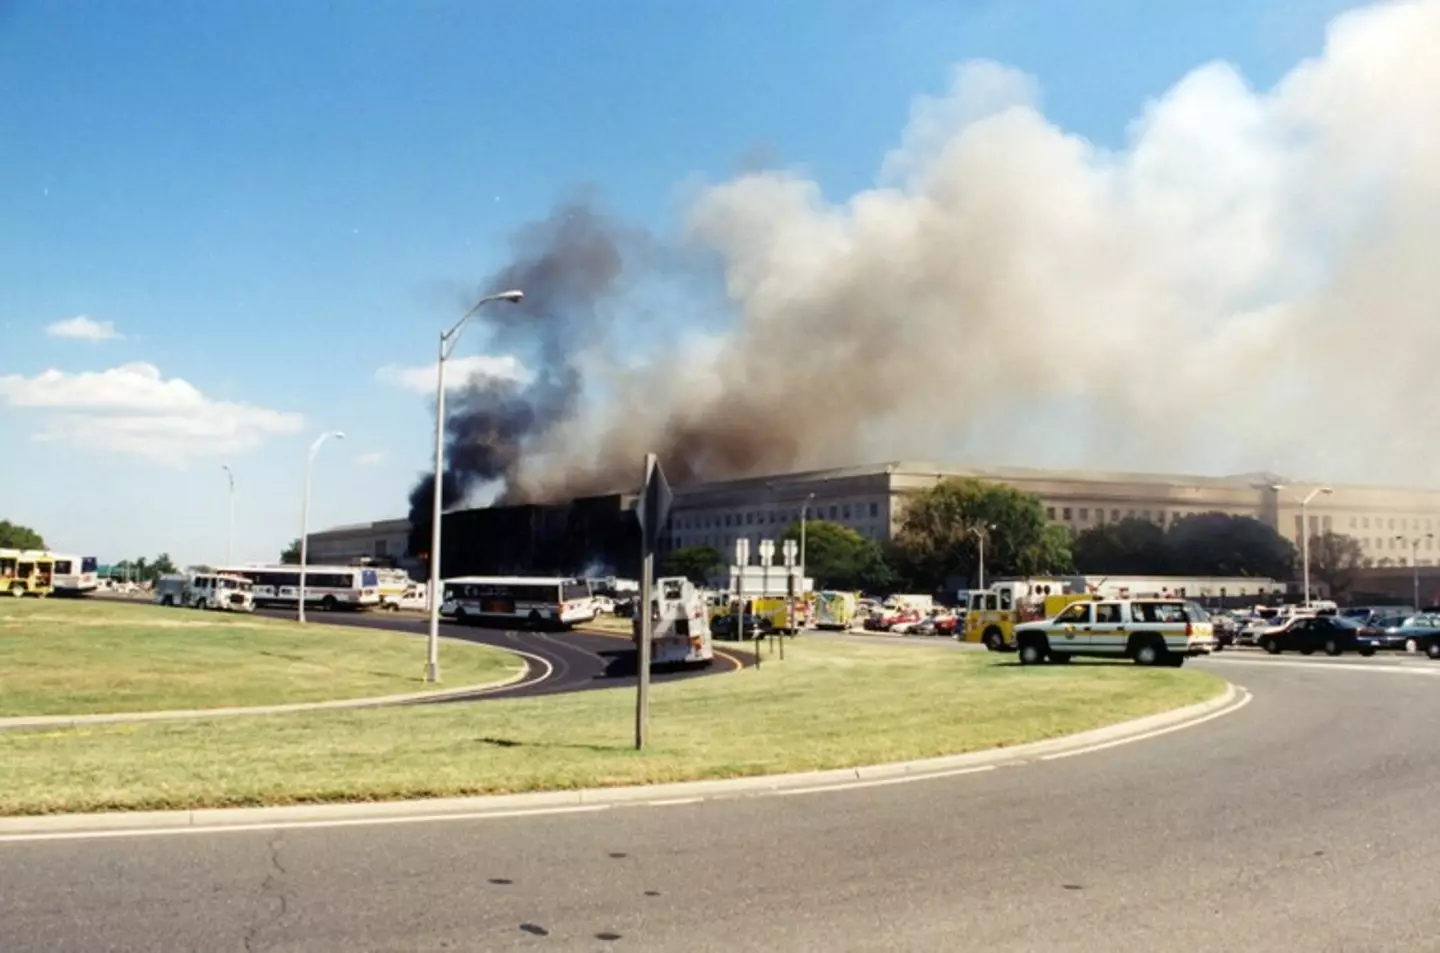 The plane crashed into the Pentagon. (Federal Bureau of Investigation via Getty Images)